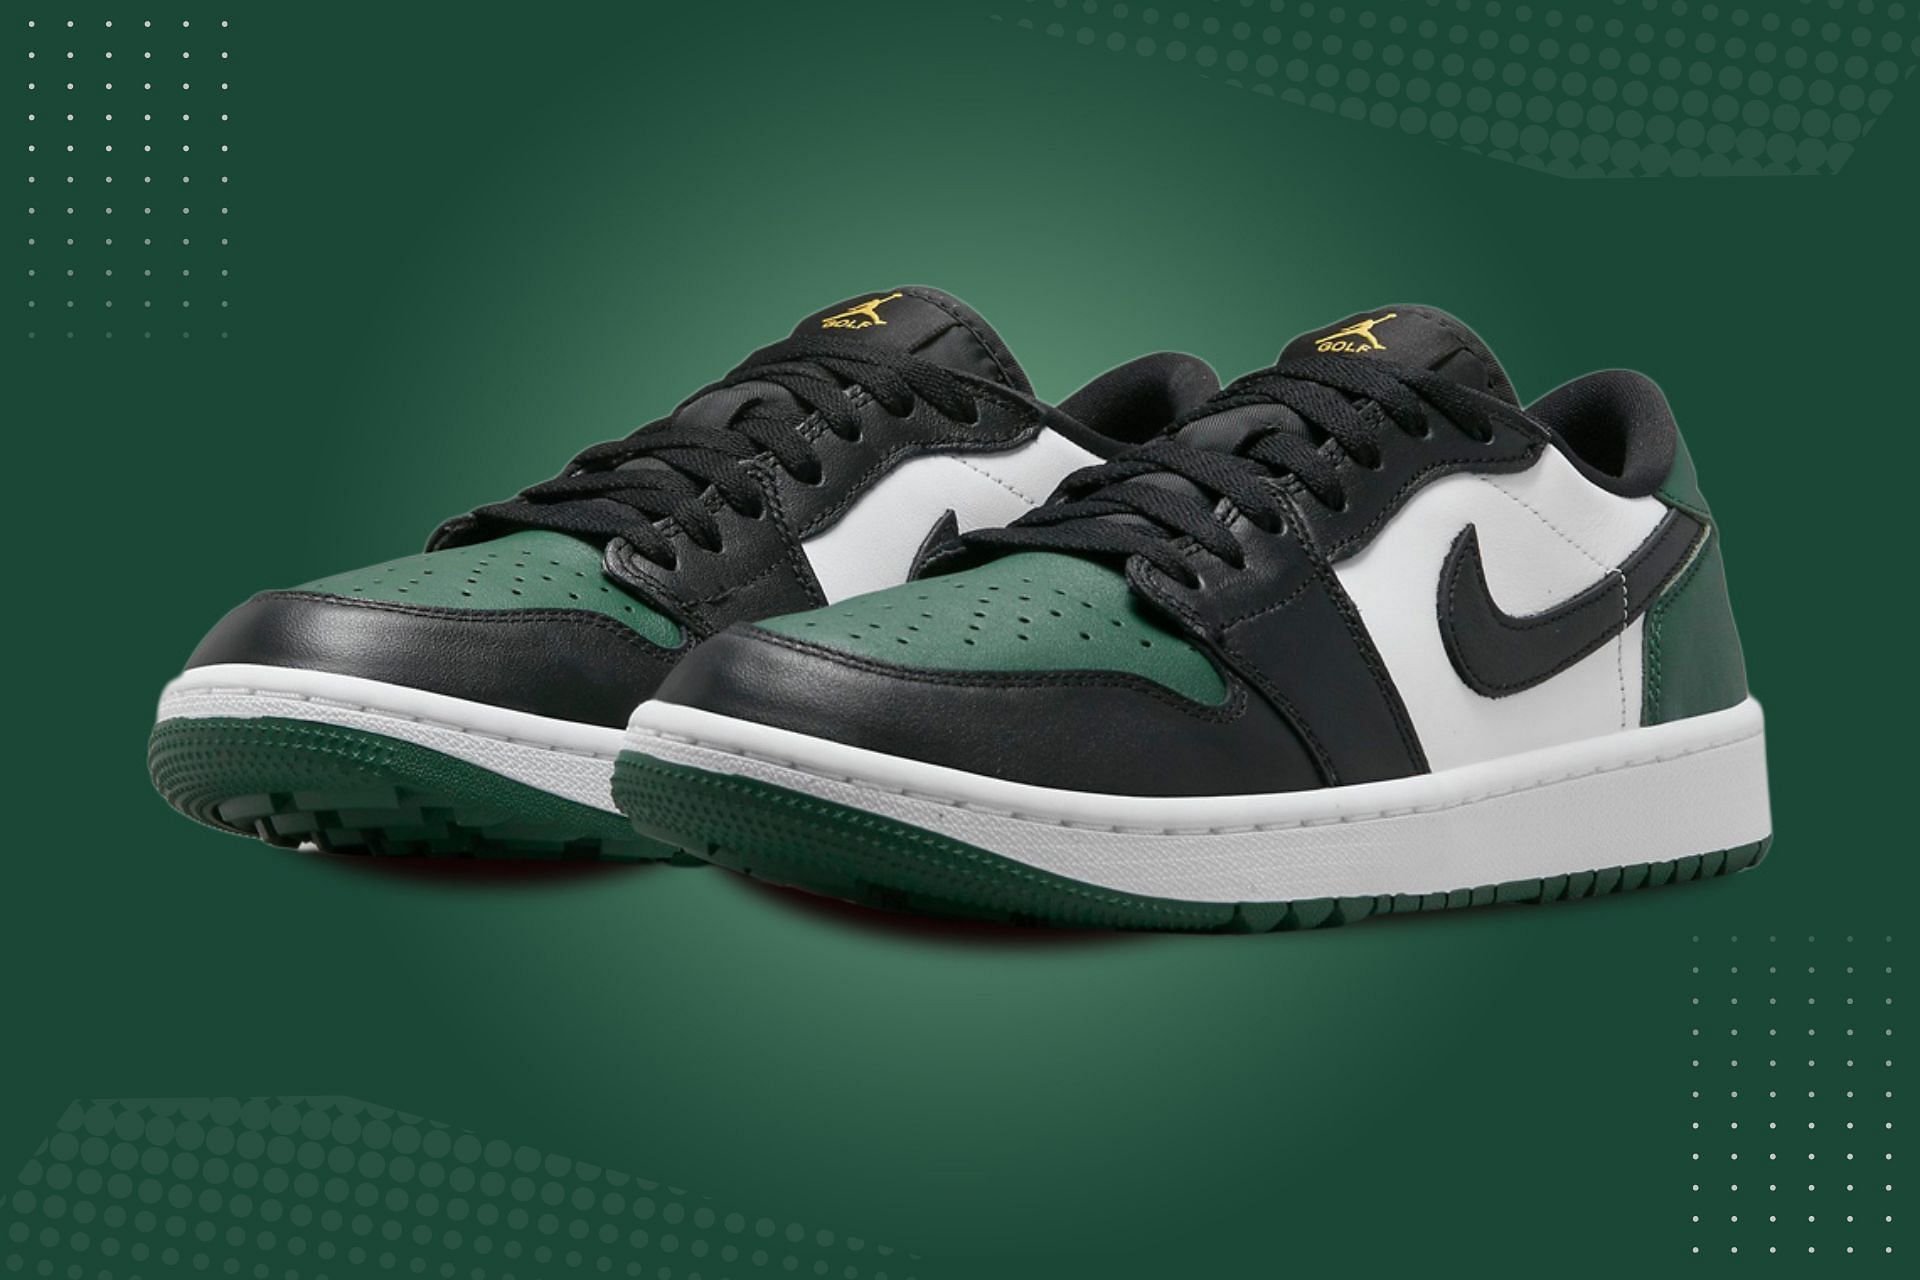 Nike: Air Jordan 1 Low Golf “Noble Green” shoes: Where to buy, price, and  more details explored